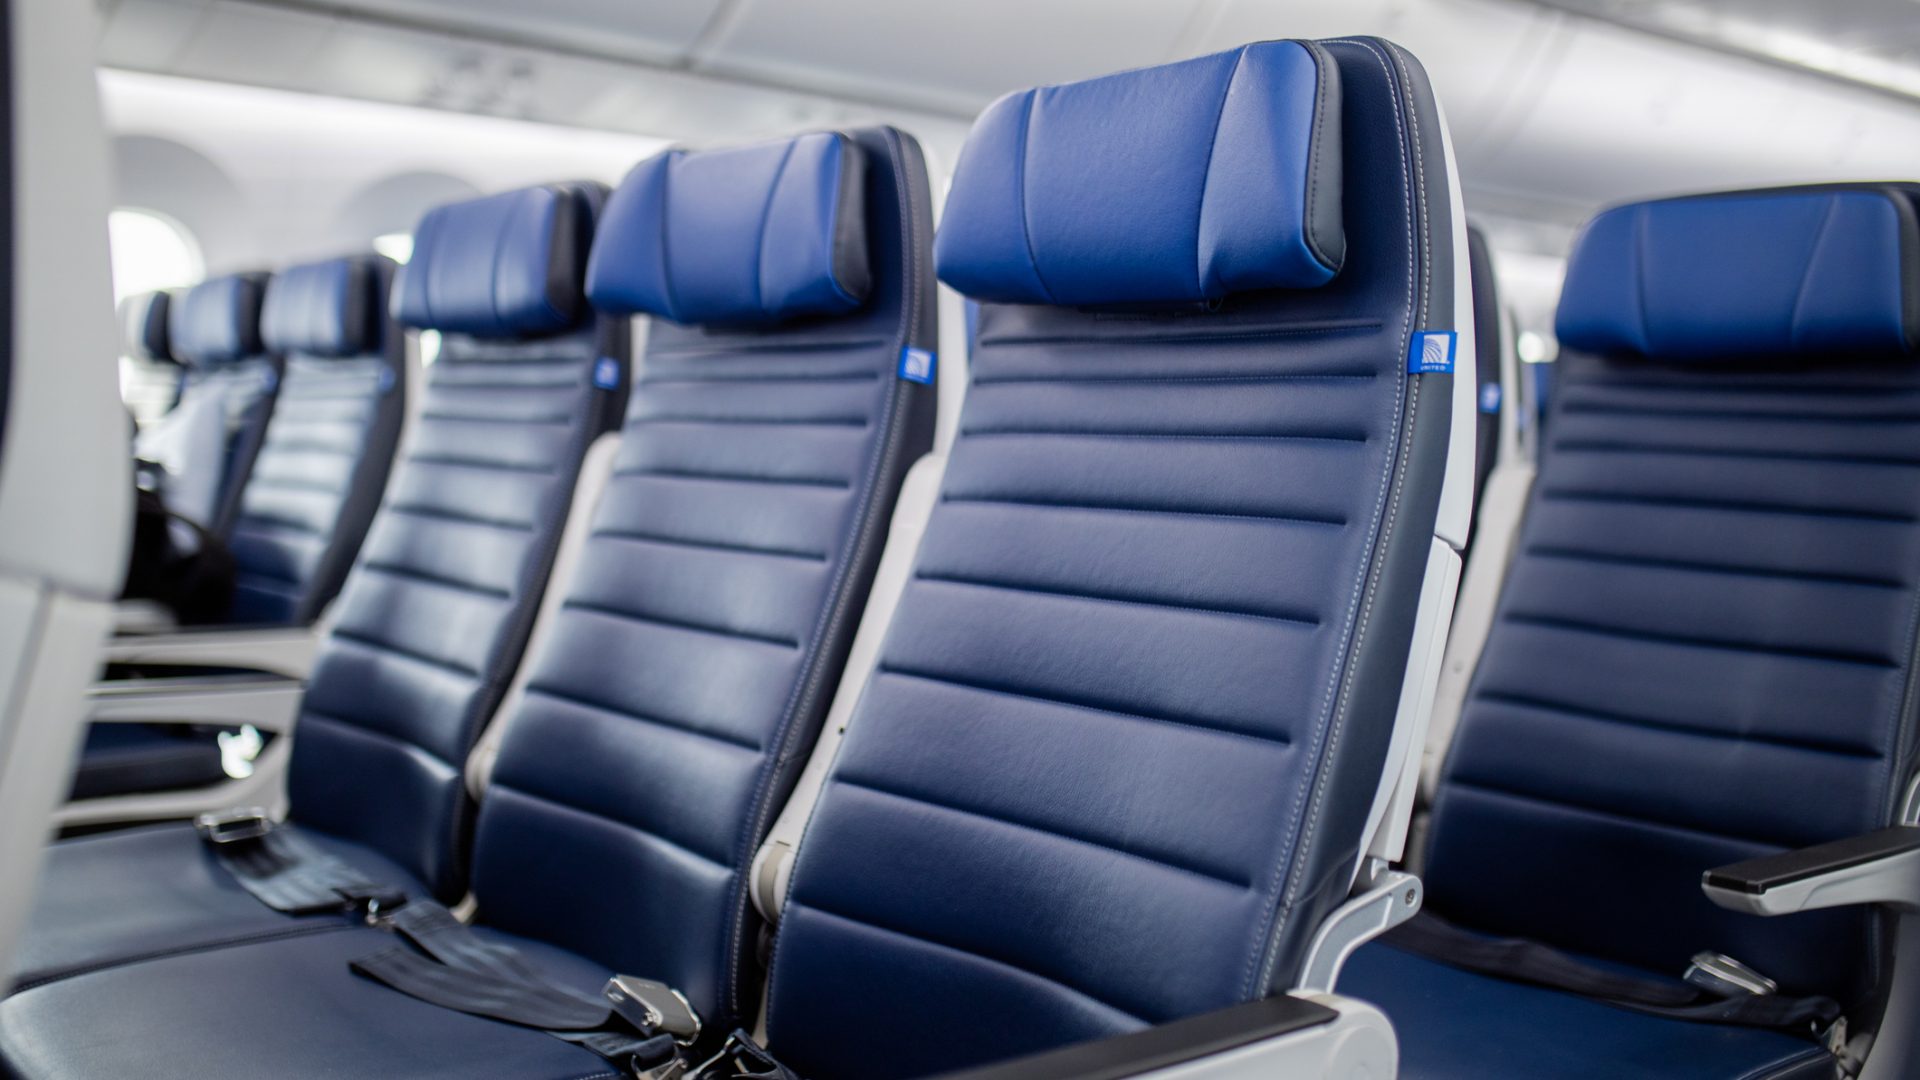 Basic Economy vs. Main Cabin: Which Is For You - NerdWallet